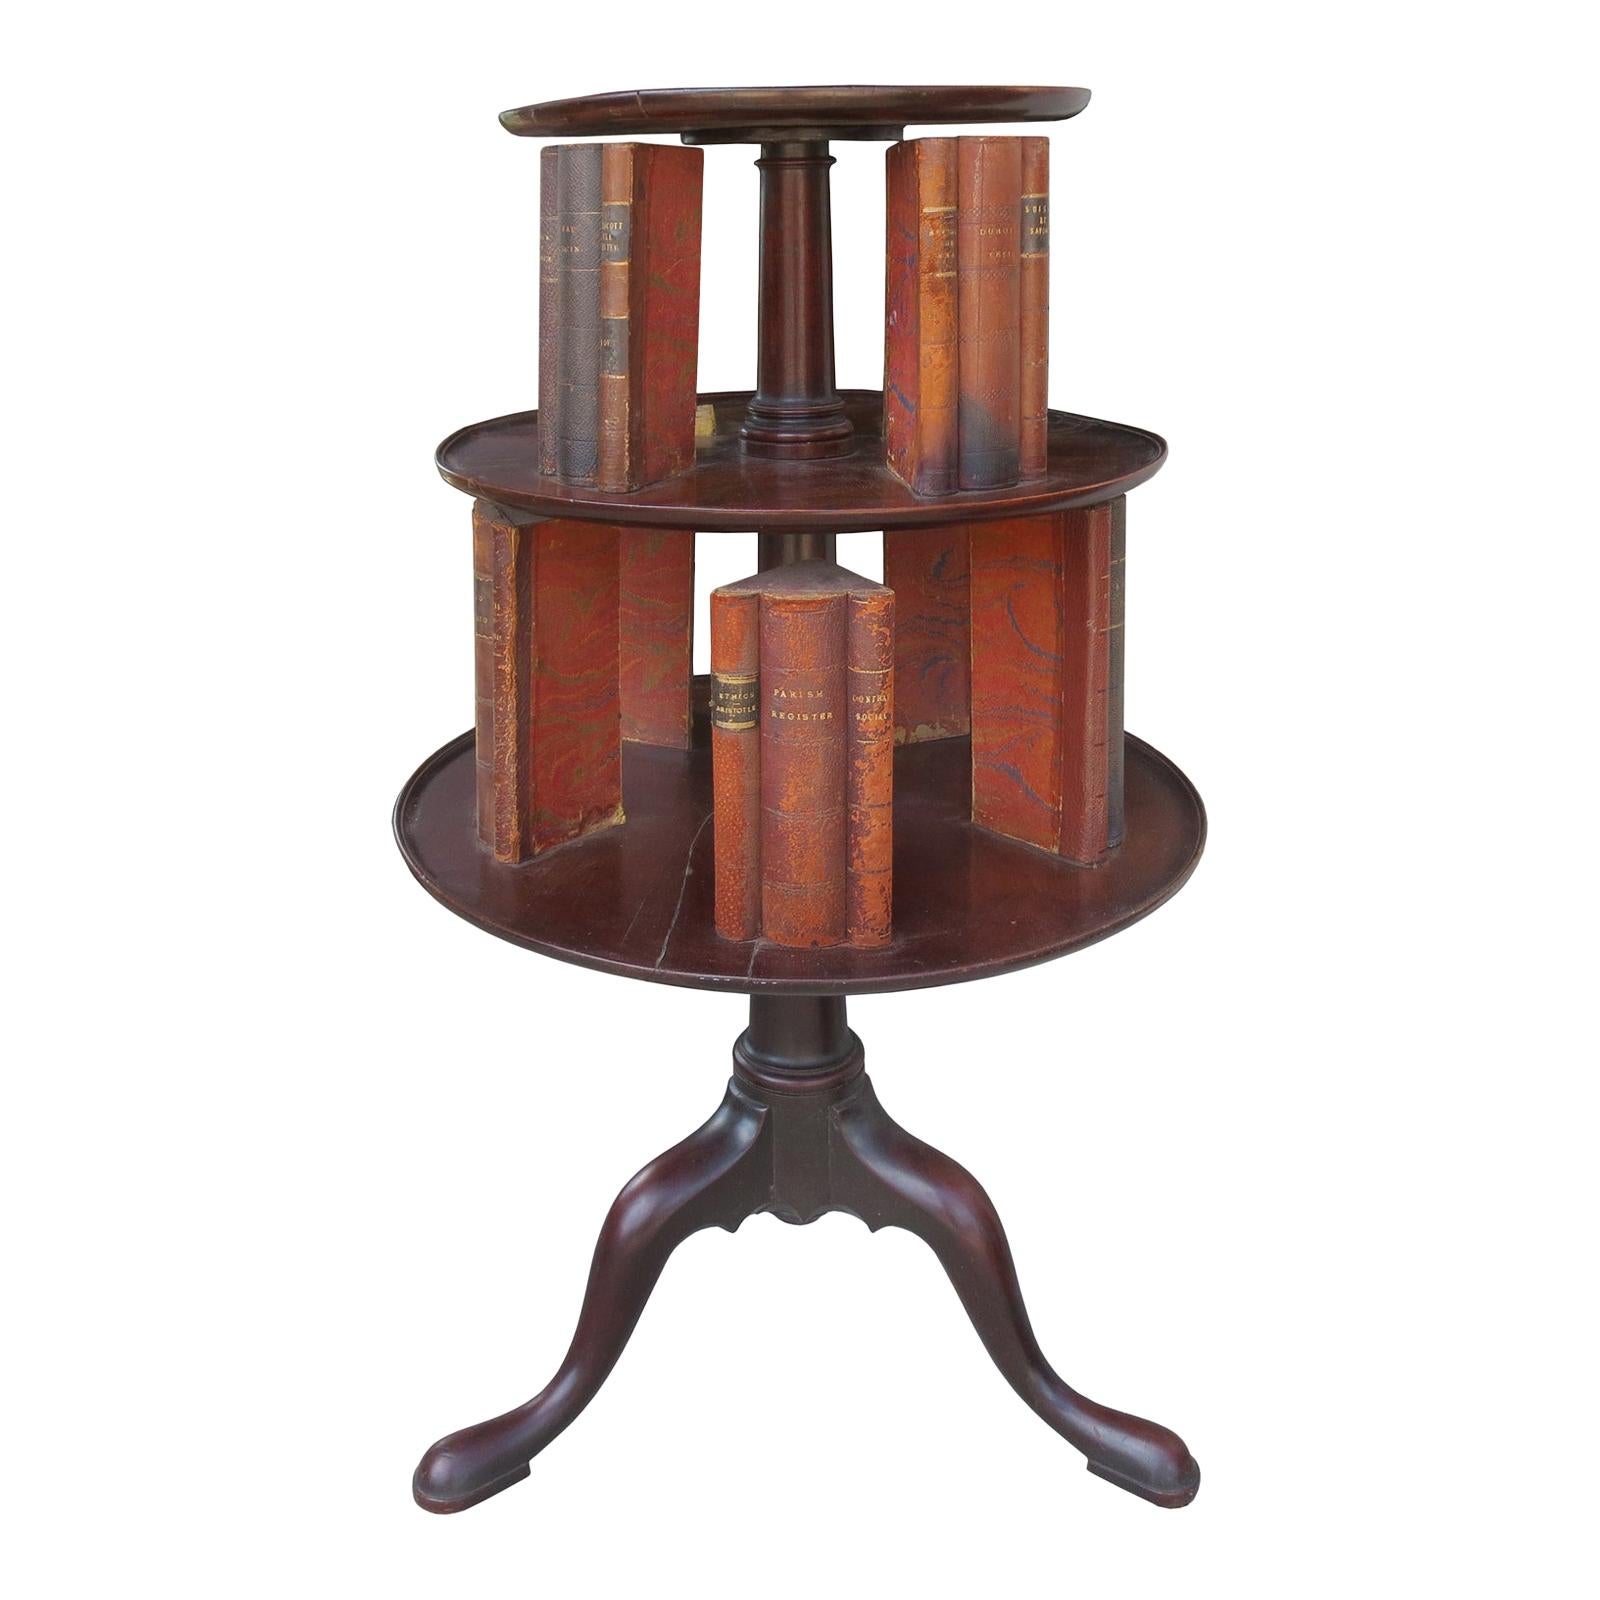 19th Century English Classic Revolving Book Stand, Mahogany For Sale